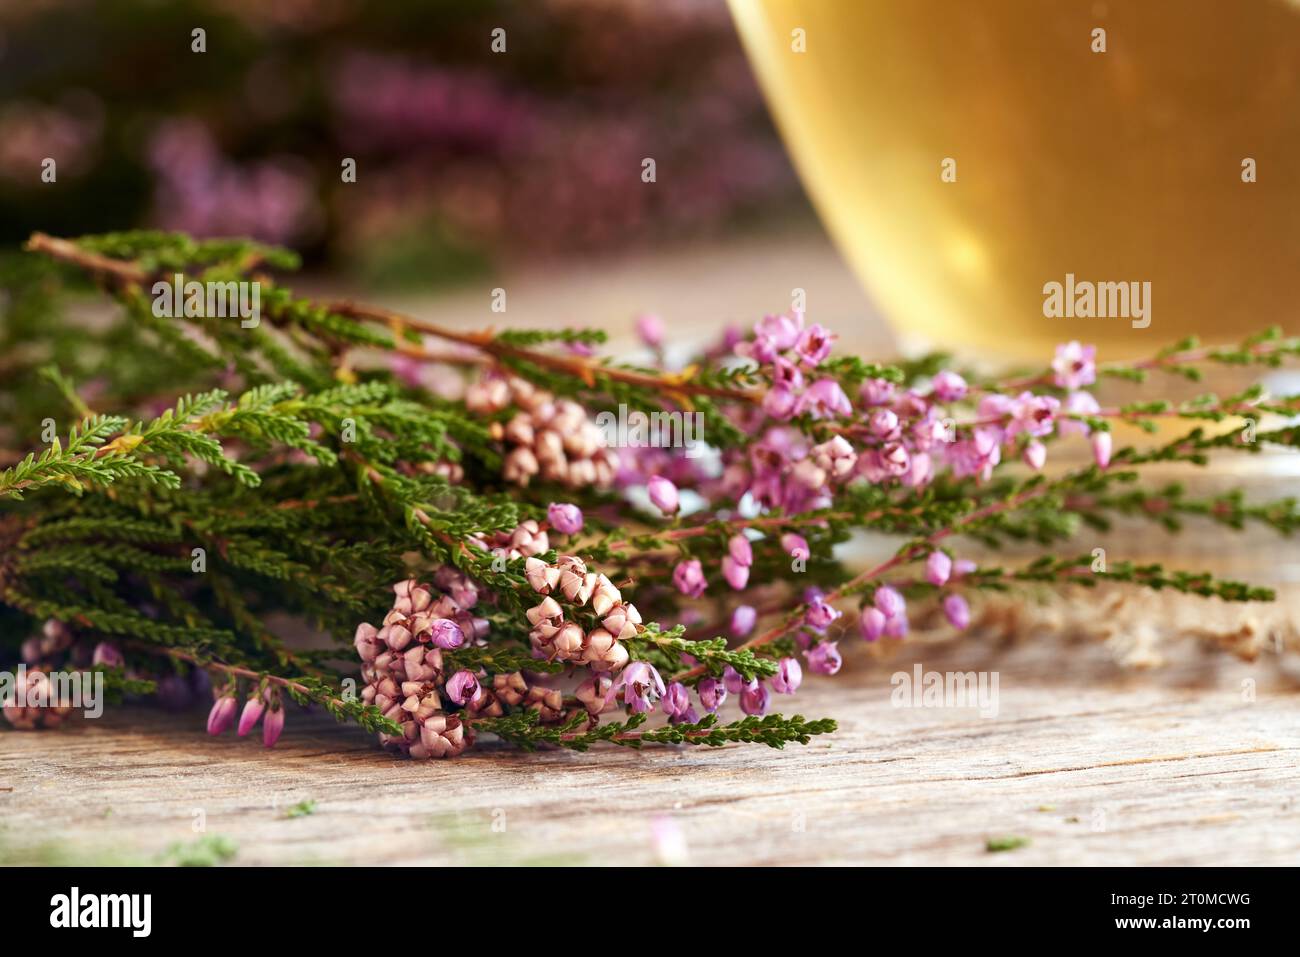 Fresh wild heather flowers on a table, with a cup of herbal tea in the background Stock Photo